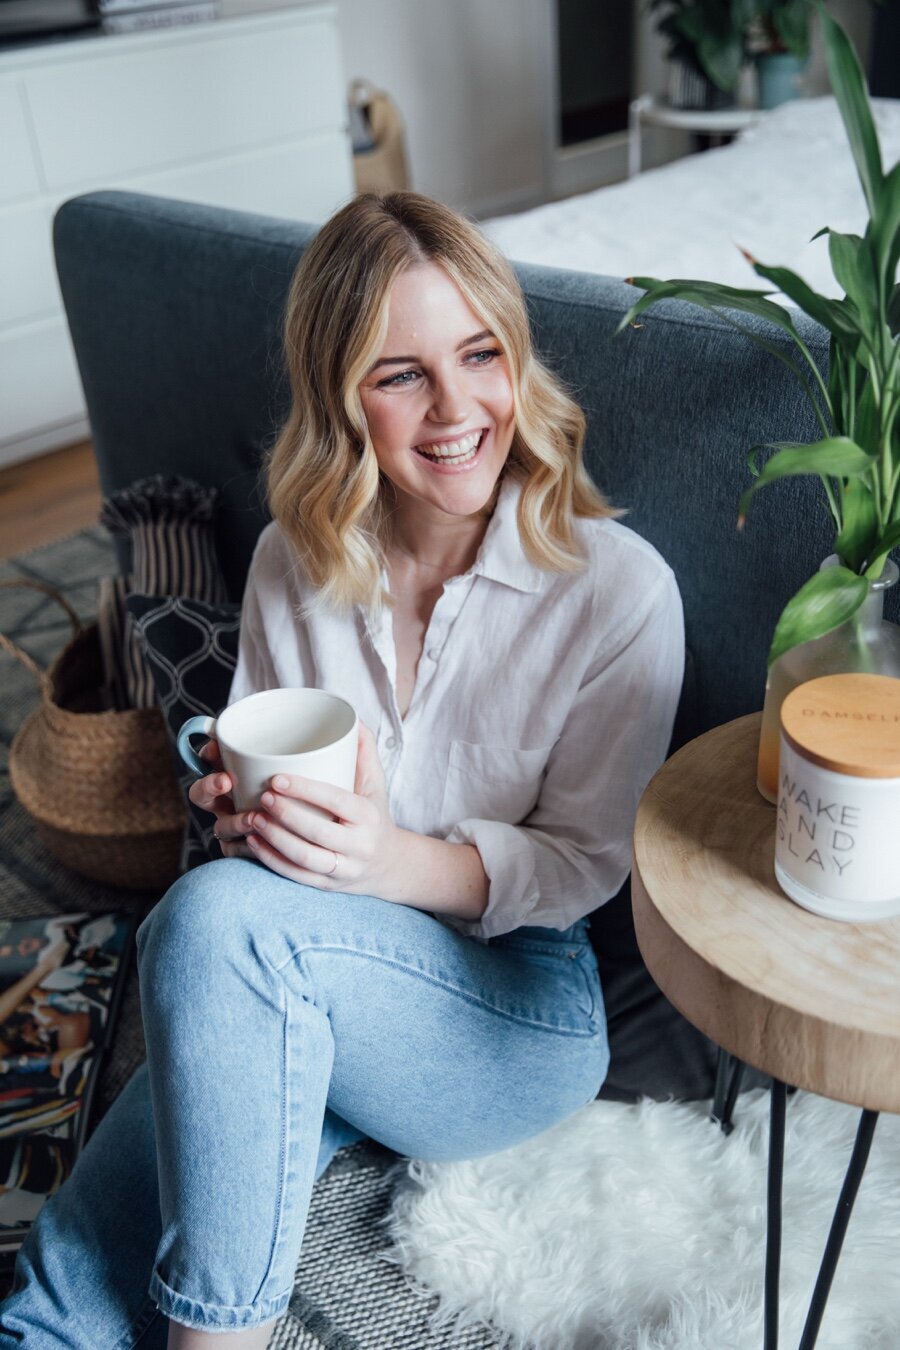 Lifestyle shot of woman smiling and drinking coffee in bedroom. Image for hair salon